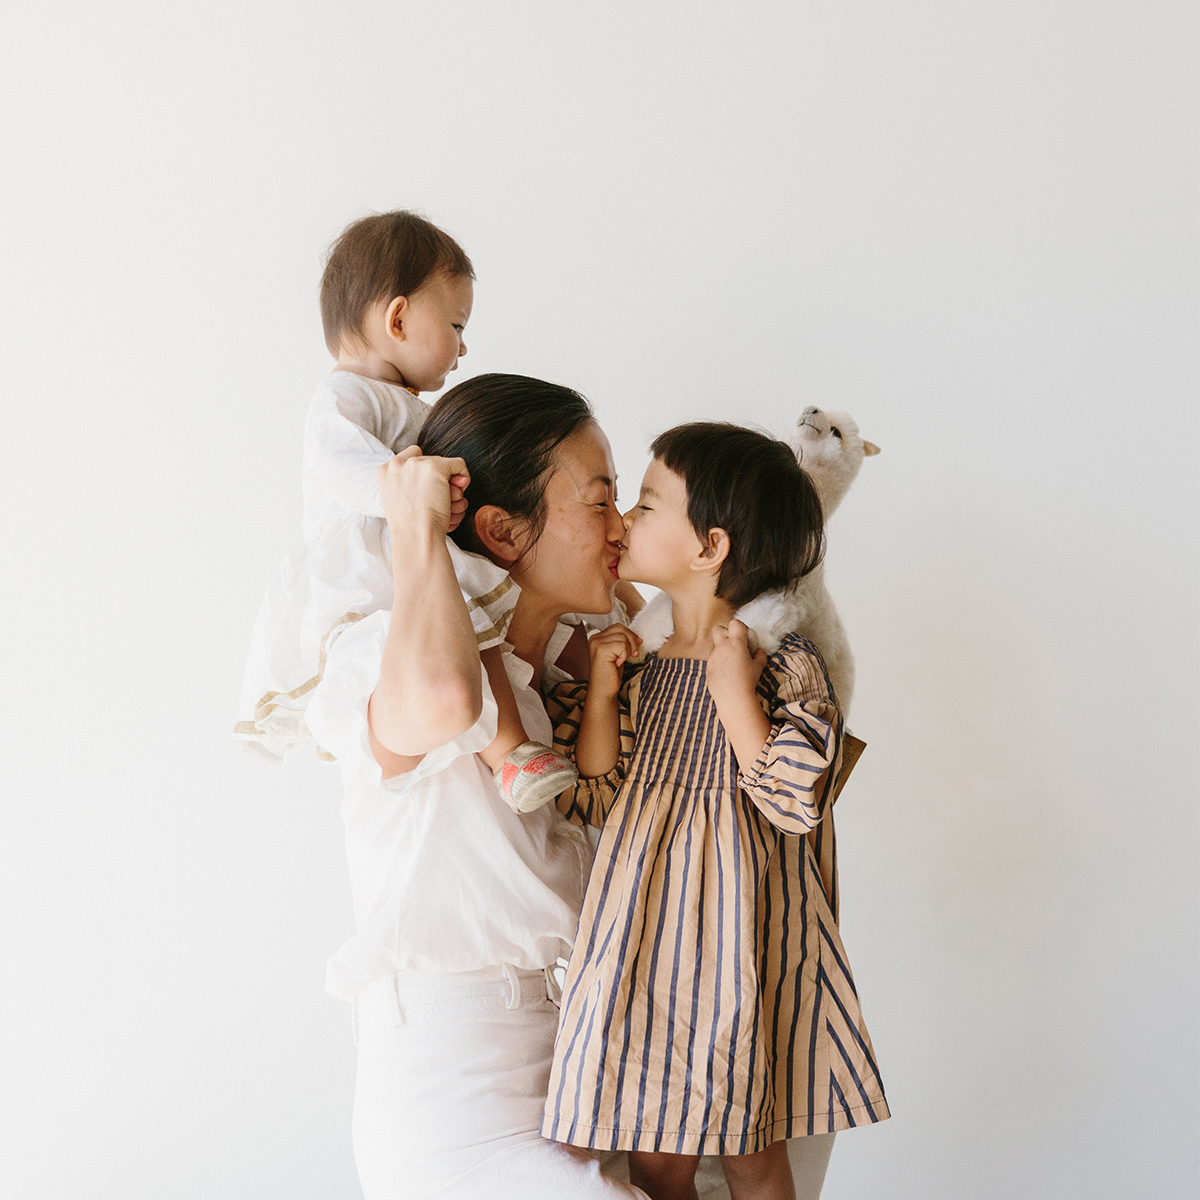 Mom with baby on her shoulder kissing toddler while making a funny face